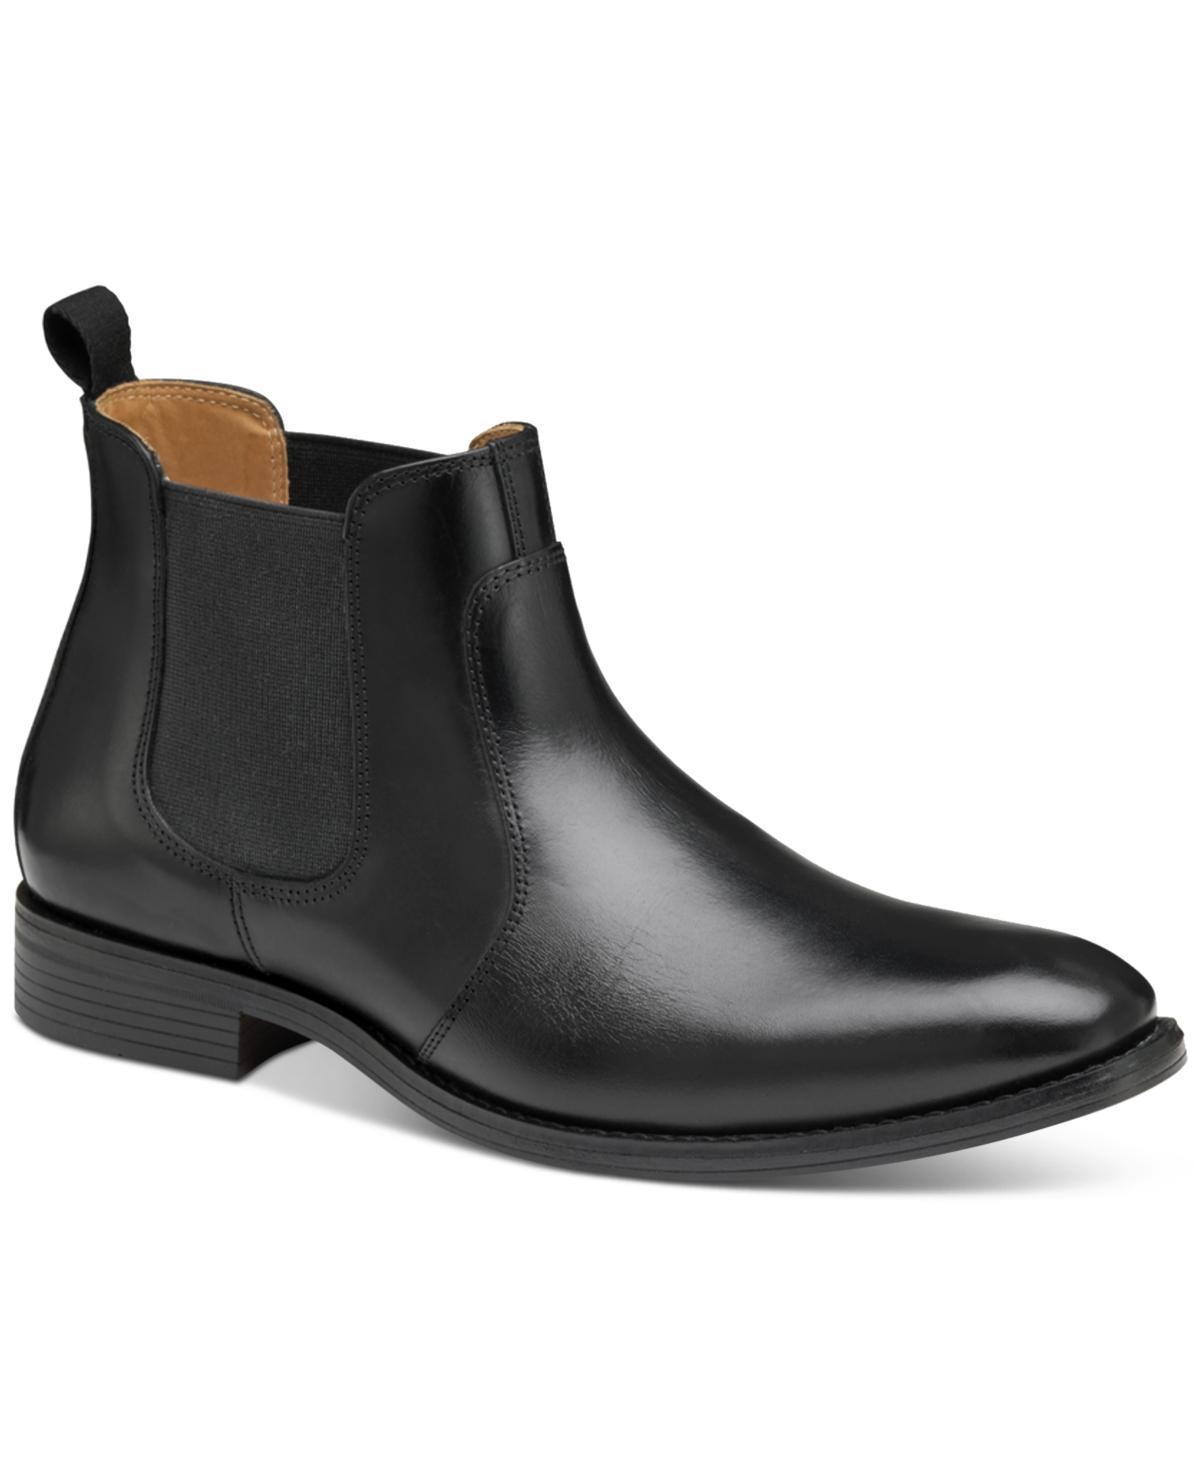 Johnston  Murphy Mens Lewis Chelsea Boots Product Image